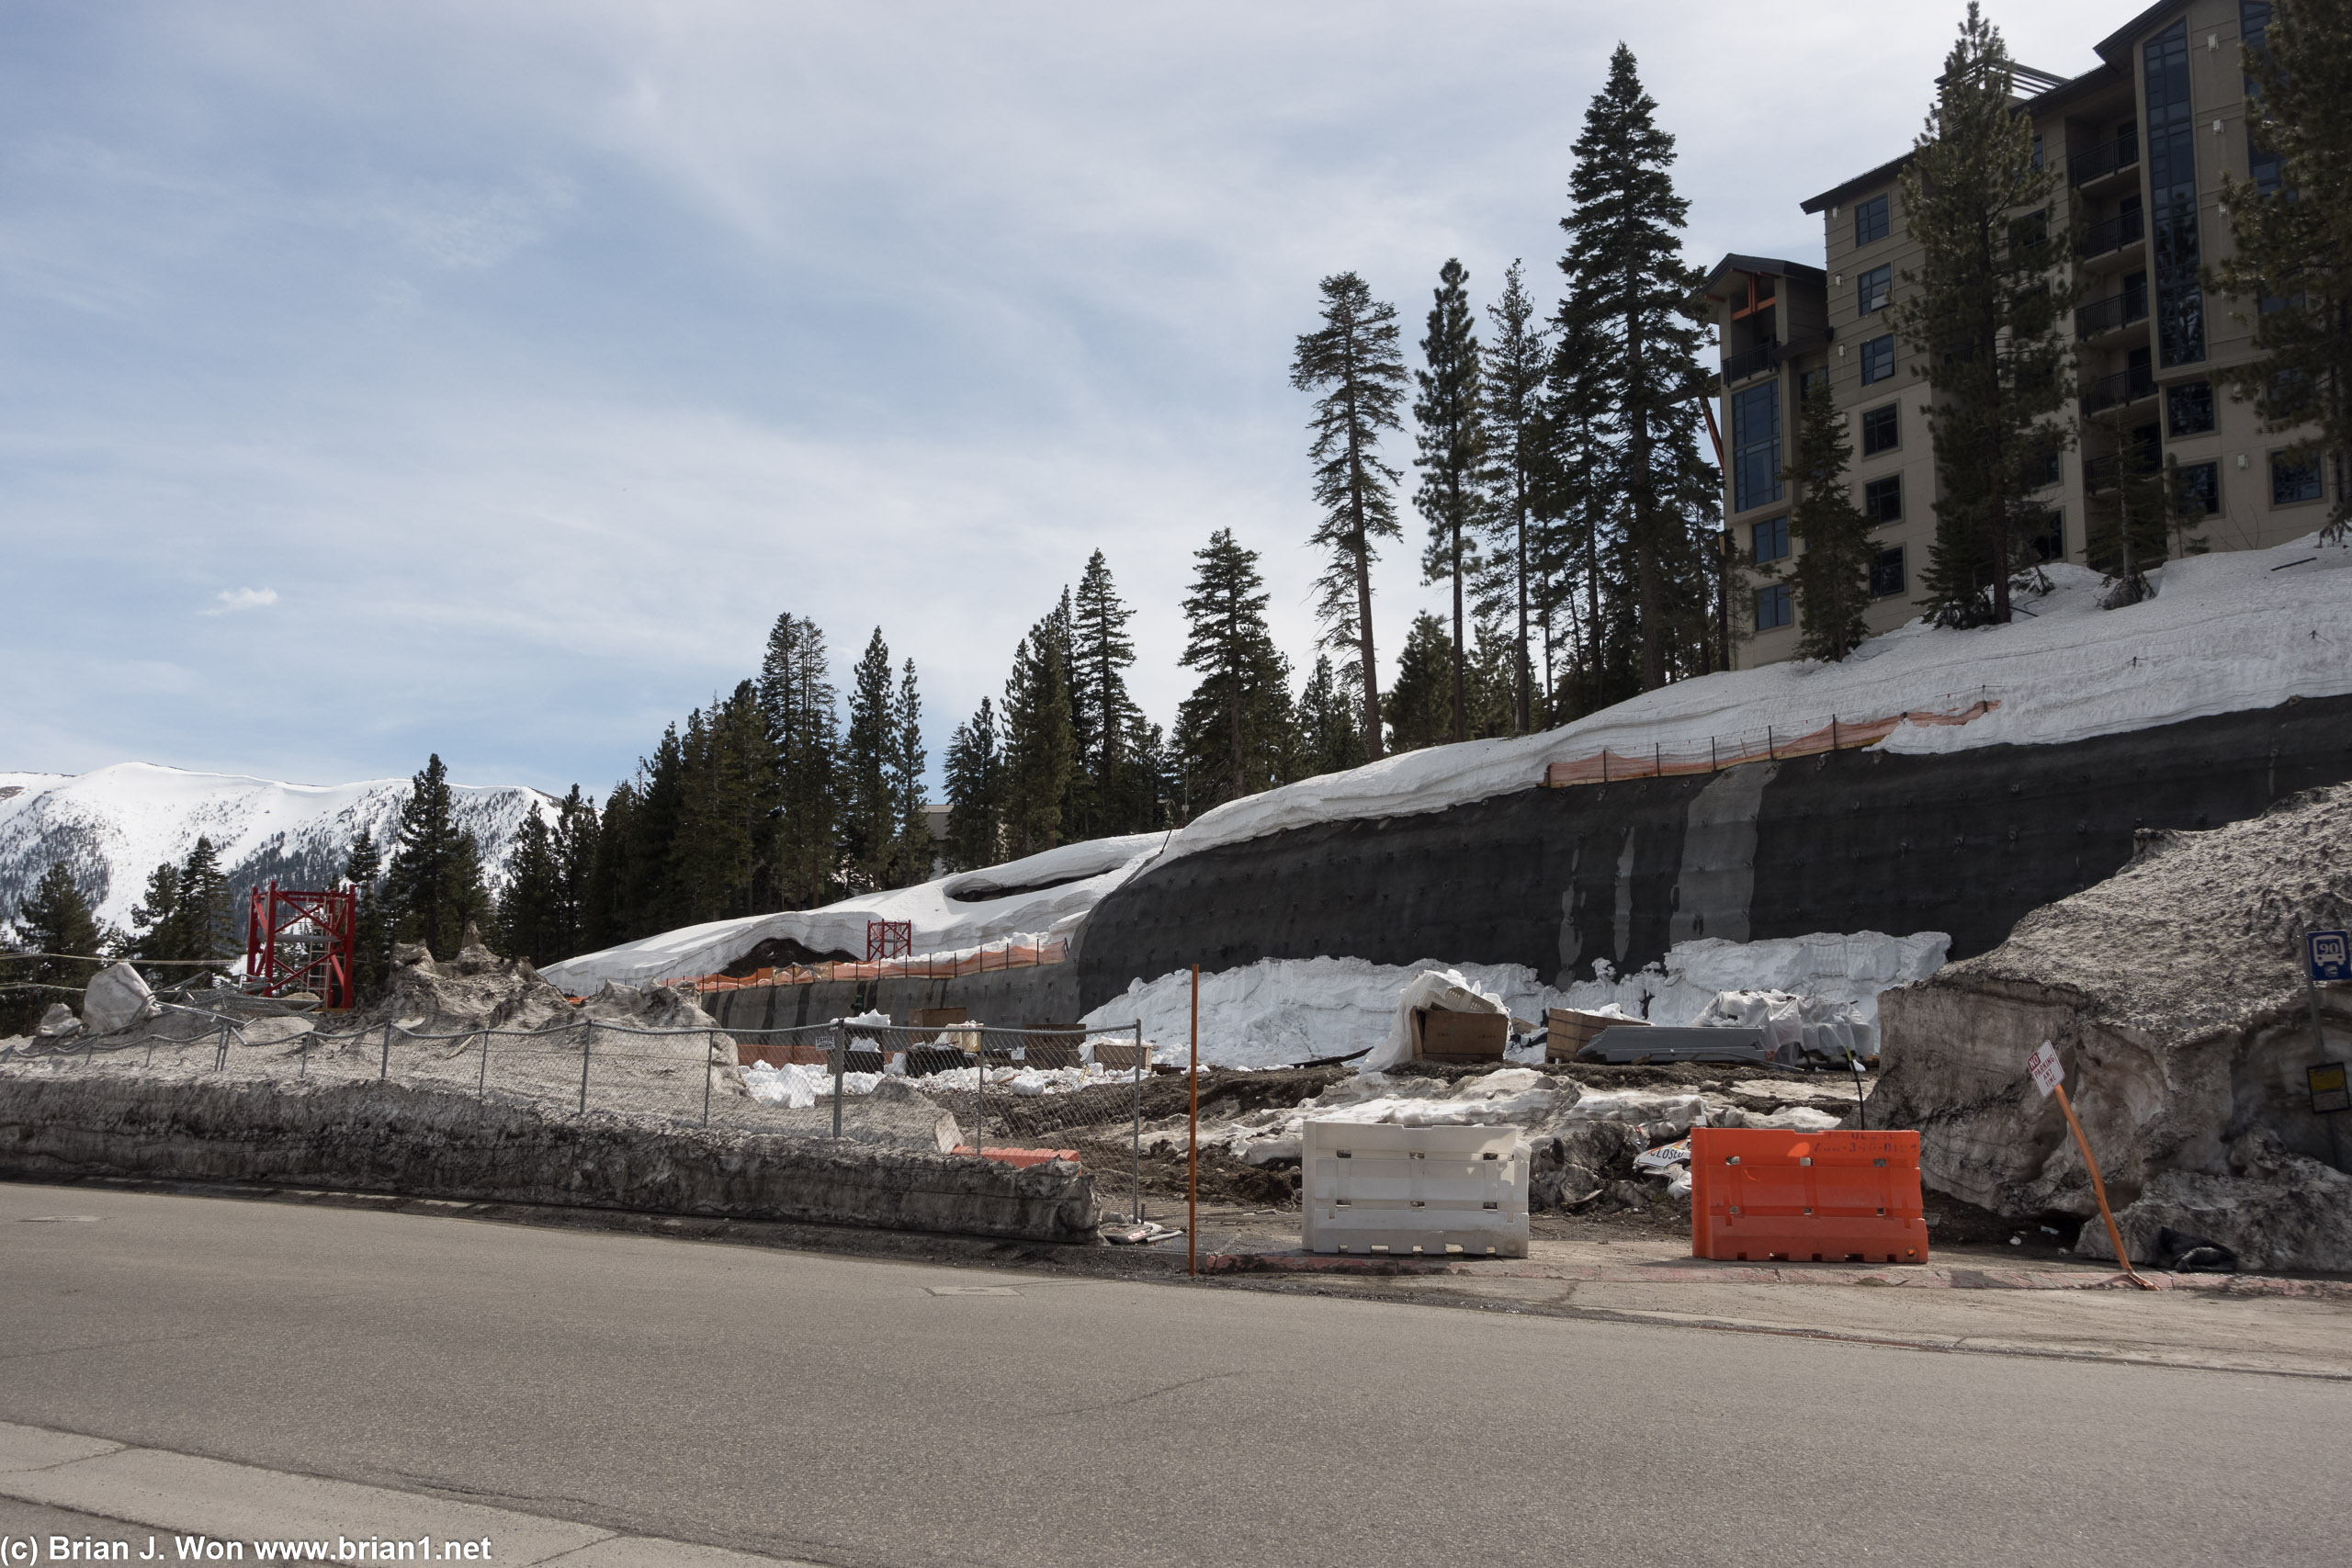 Limelight Mammoth Hotel & Residences under construction.